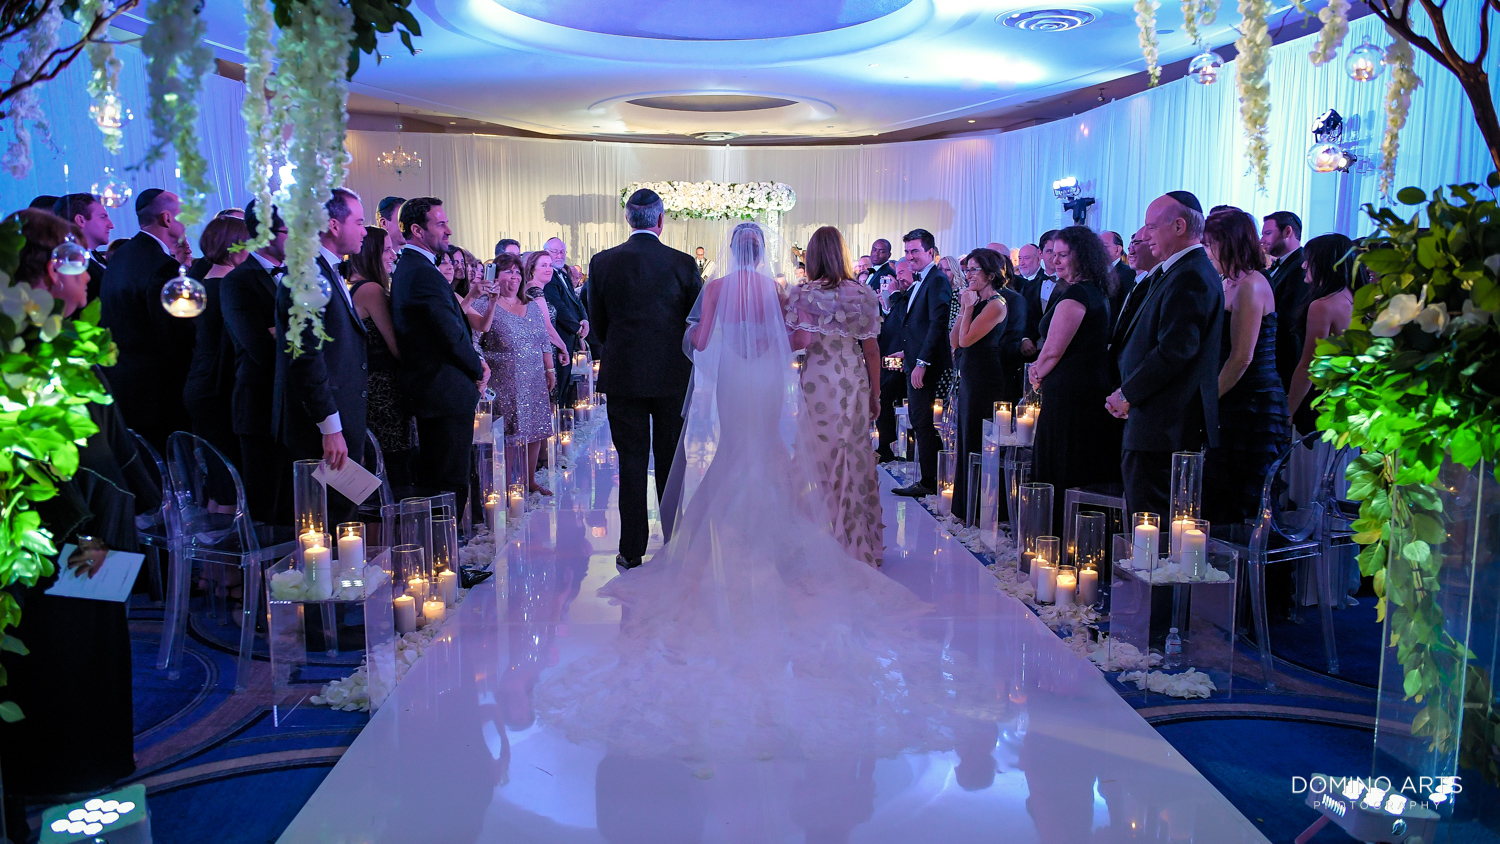 Bride procession at jewish wedding pictures at fontainebleau miami